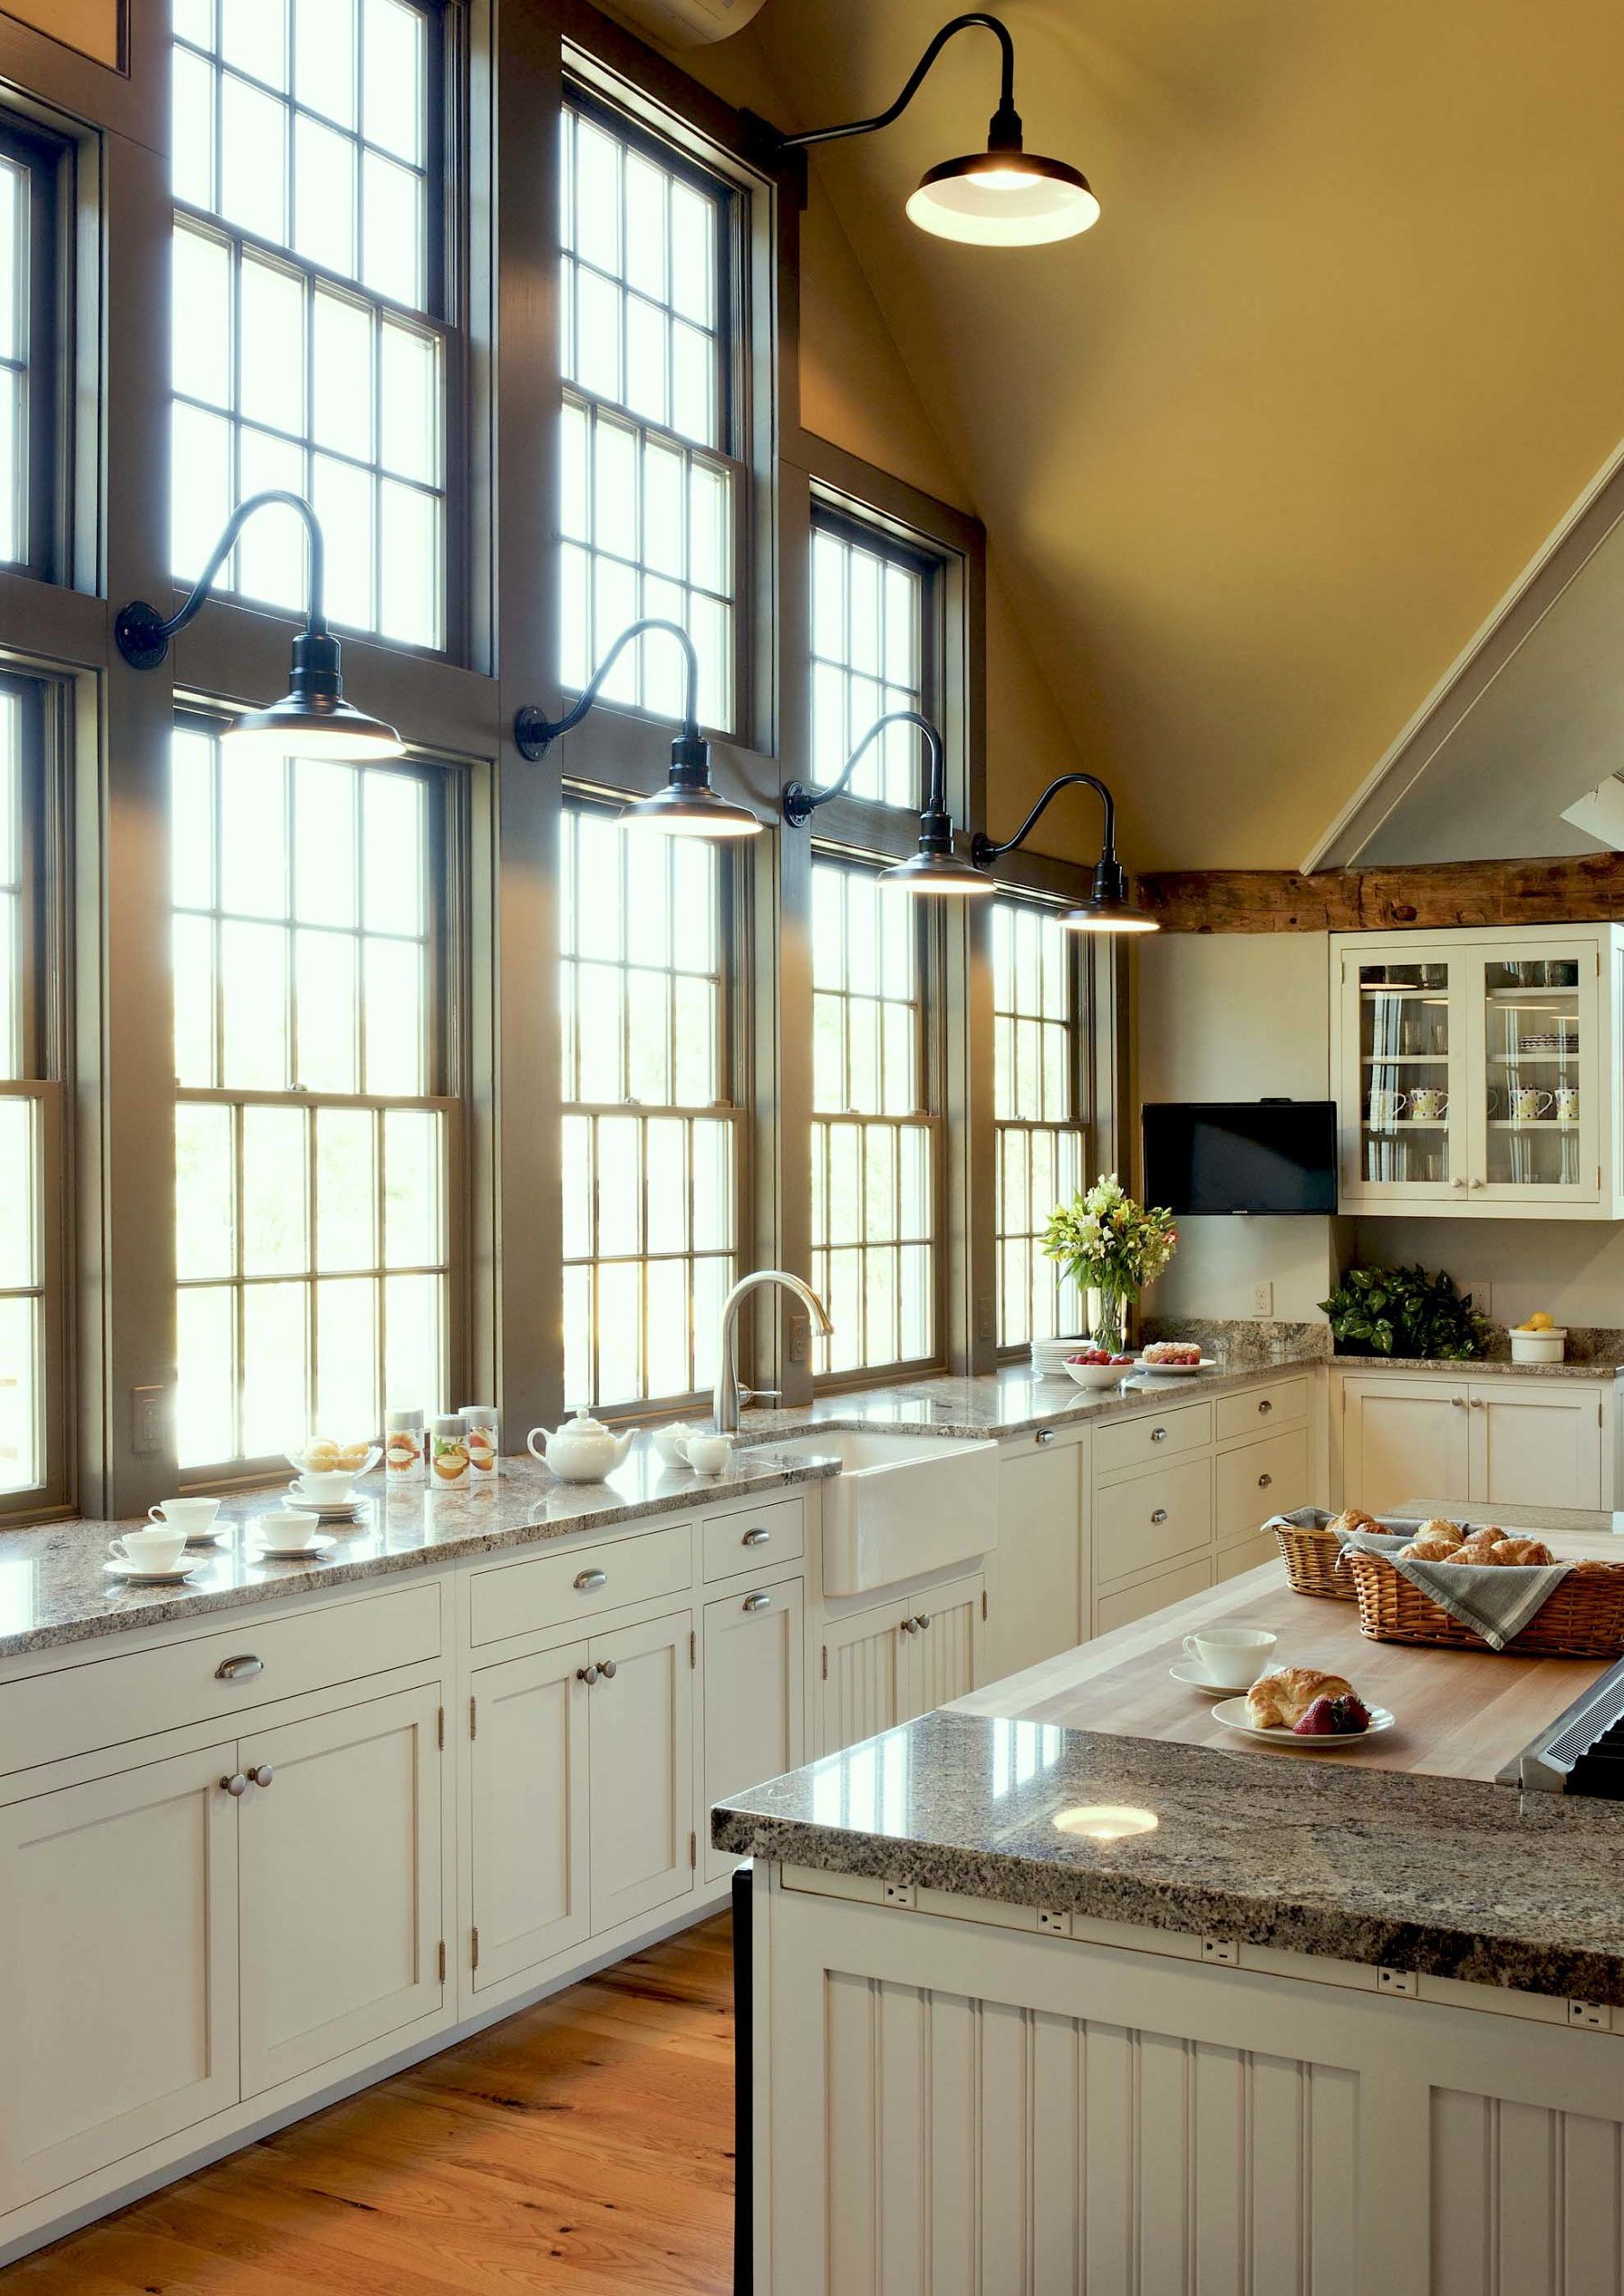 Crown Point kitchen cabinet company - rustic kitchen - huge windows